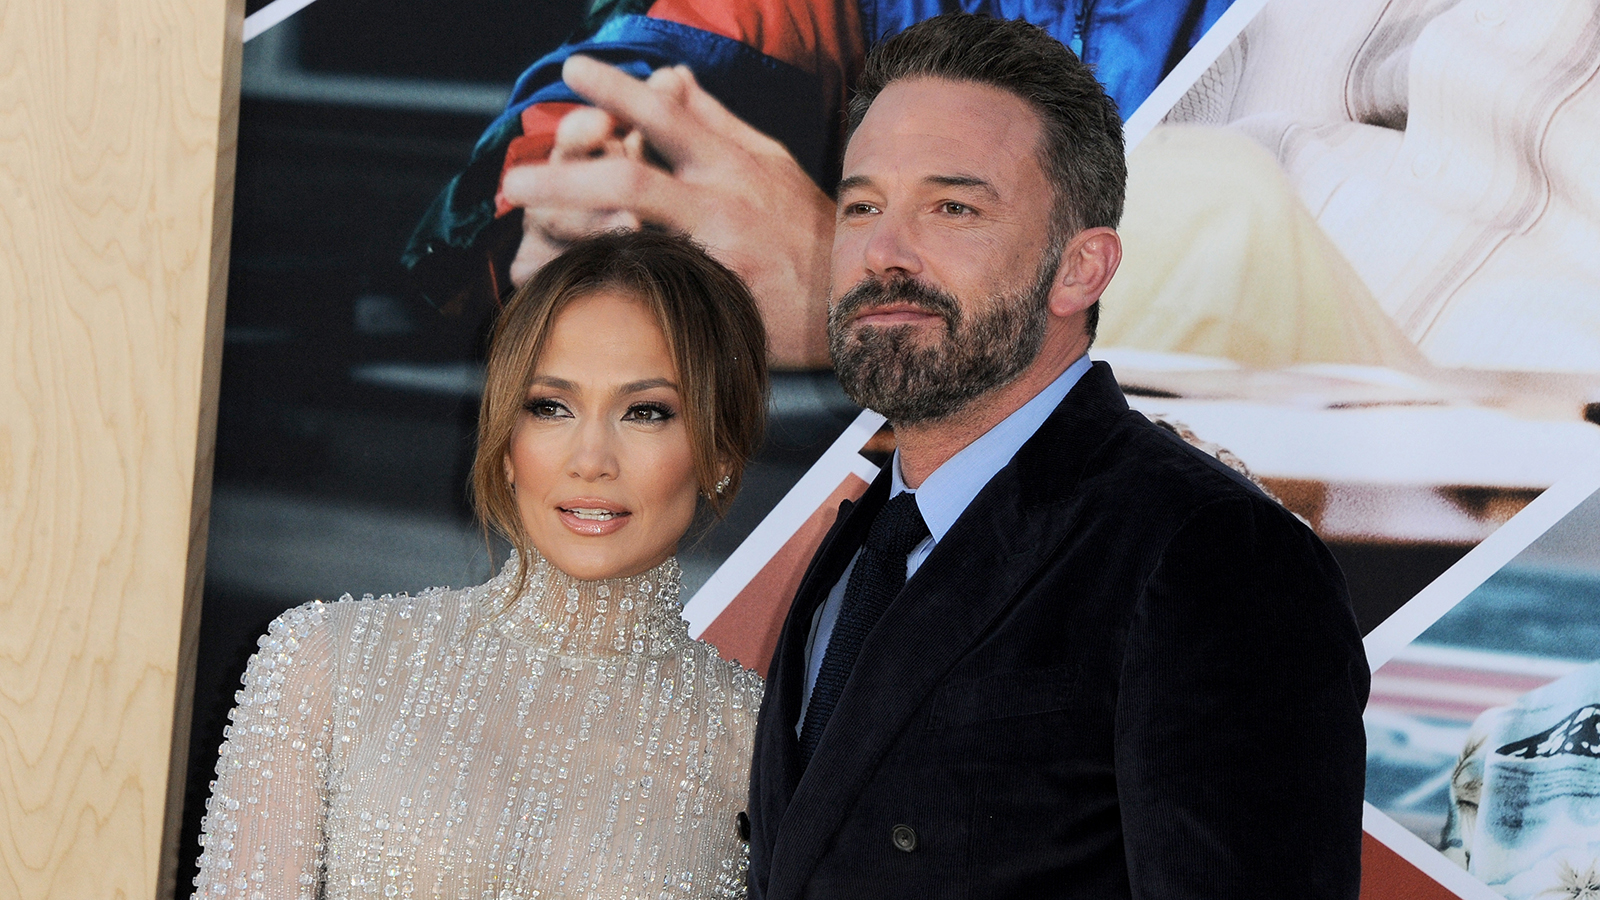 Jennifer Lopez and Ben Affleck at the Amazon Studios' World premiere of 'AIR' held at the Regency Village Theatre in Westwood, USA on March 27, 2023.